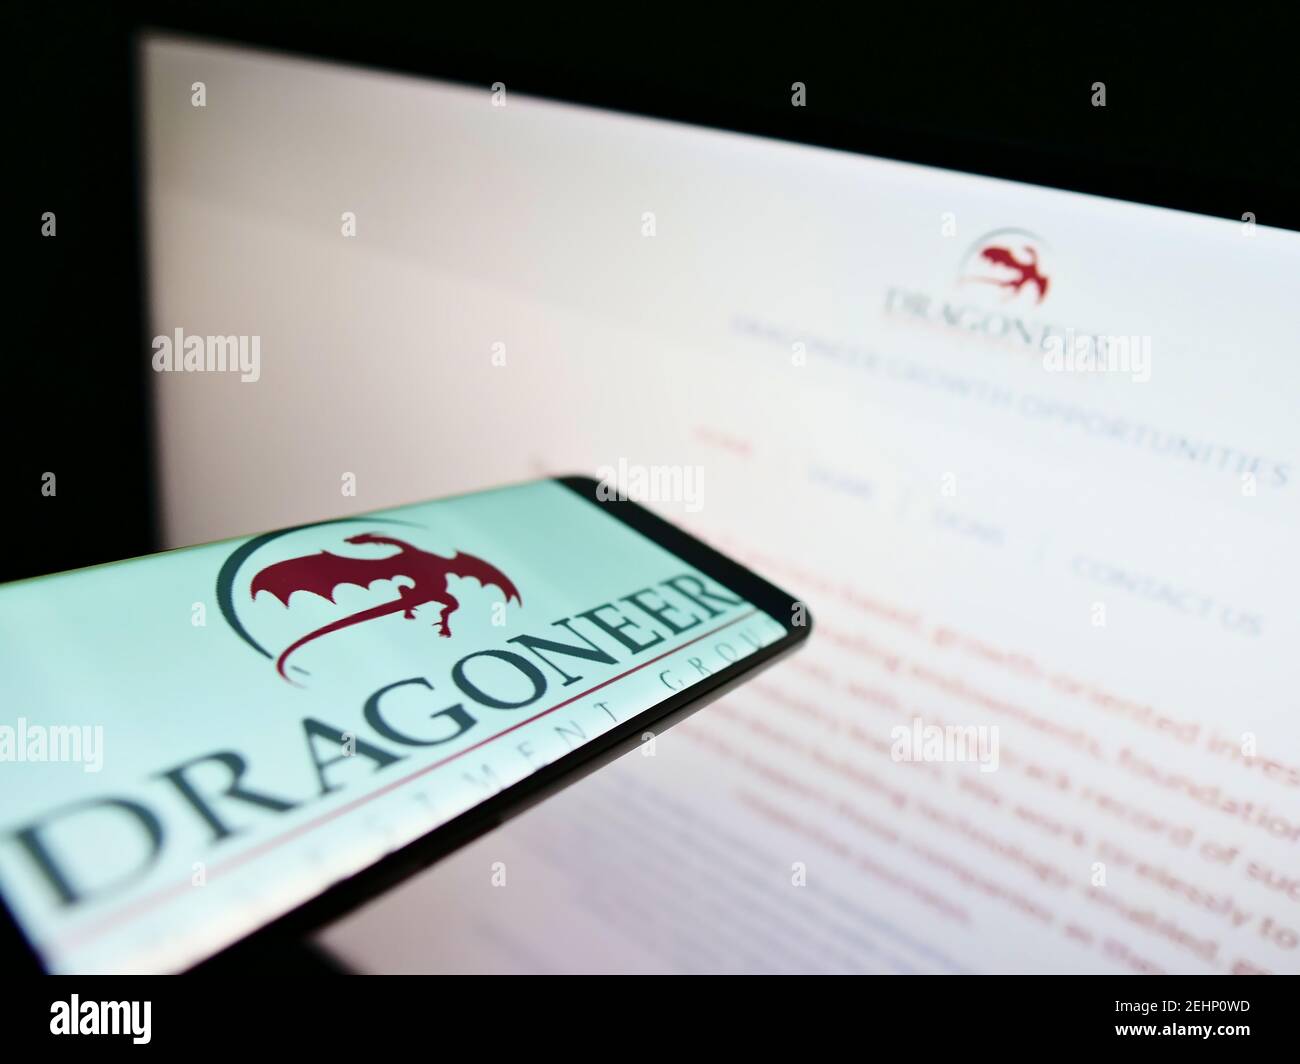 Mobile phone with business logo of American investor Dragoneer Investment Group on screen in front of website. Focus on center of phone display. Stock Photo